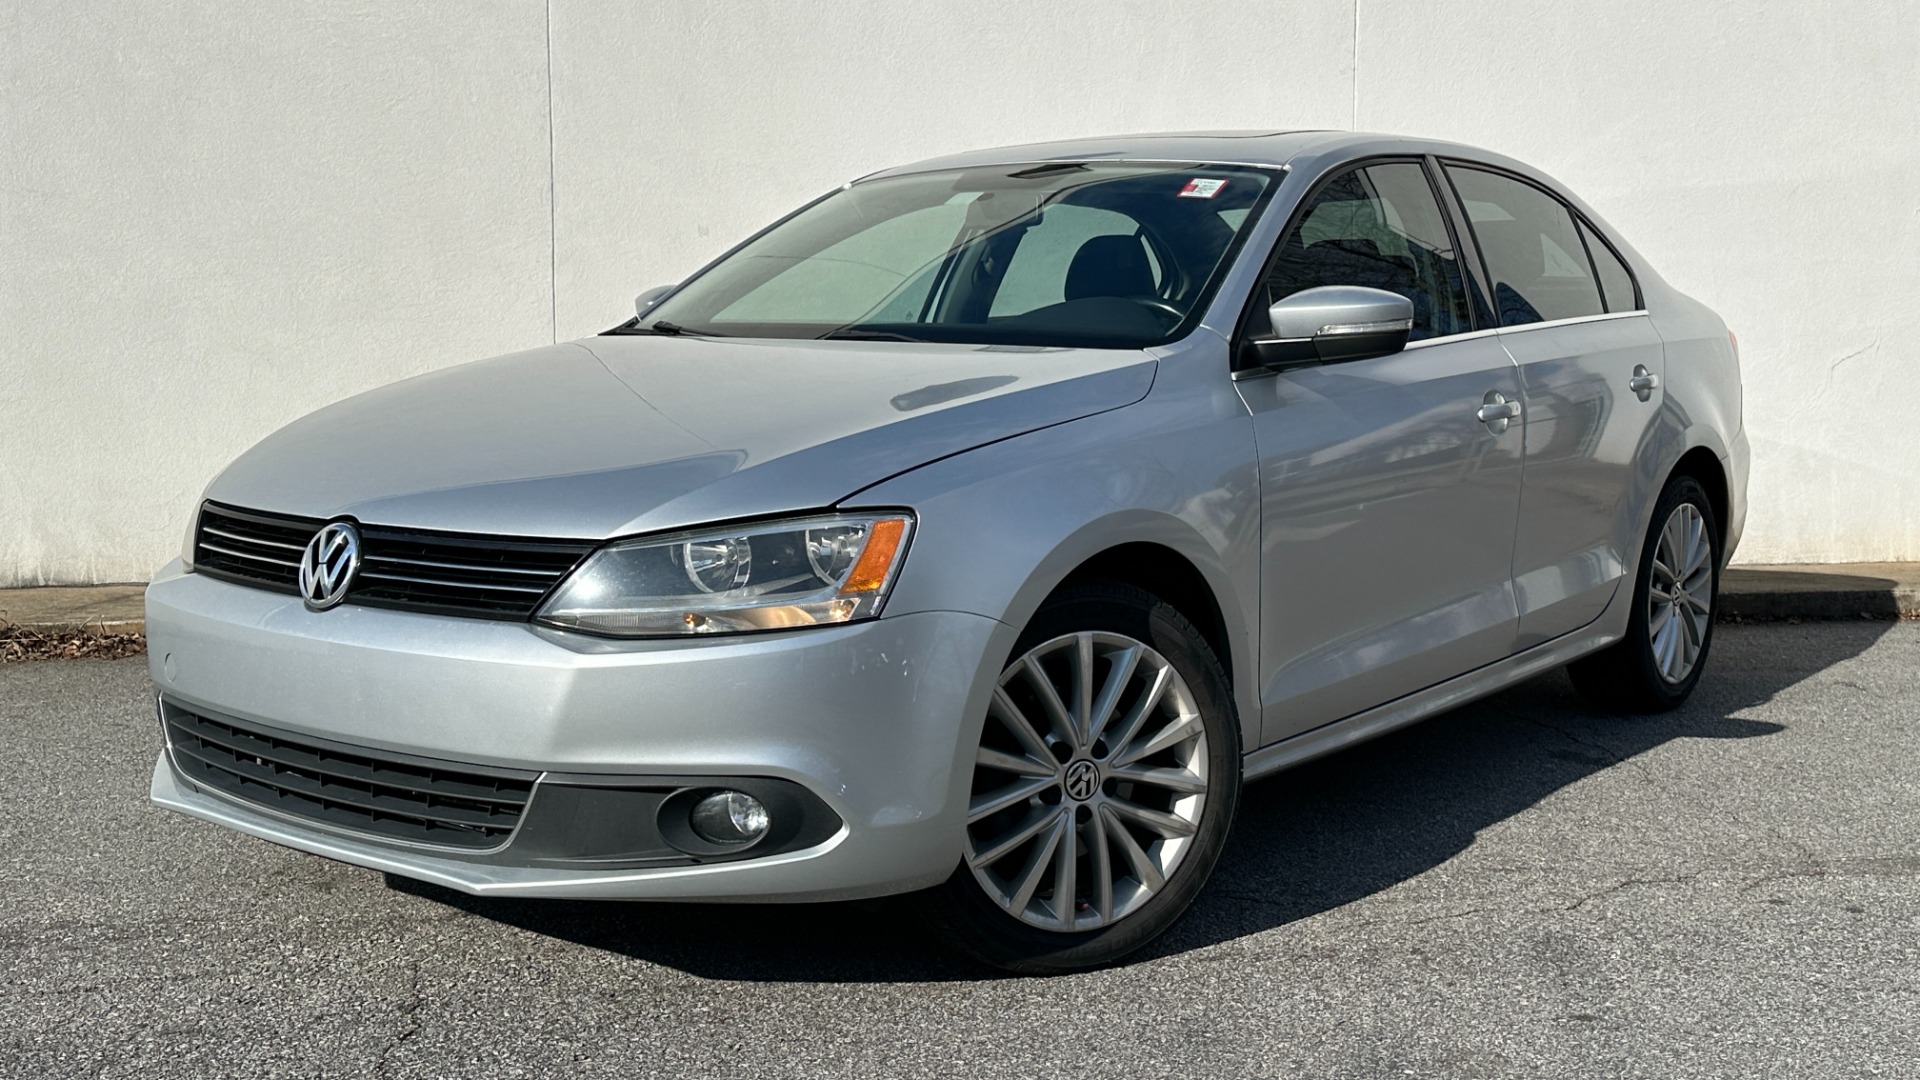 Used 2011 Volkswagen Jetta Sedan SEL / LEATHER / SUNROOF / BLUETOOTH for sale $7,995 at Formula Imports in Charlotte NC 28227 1